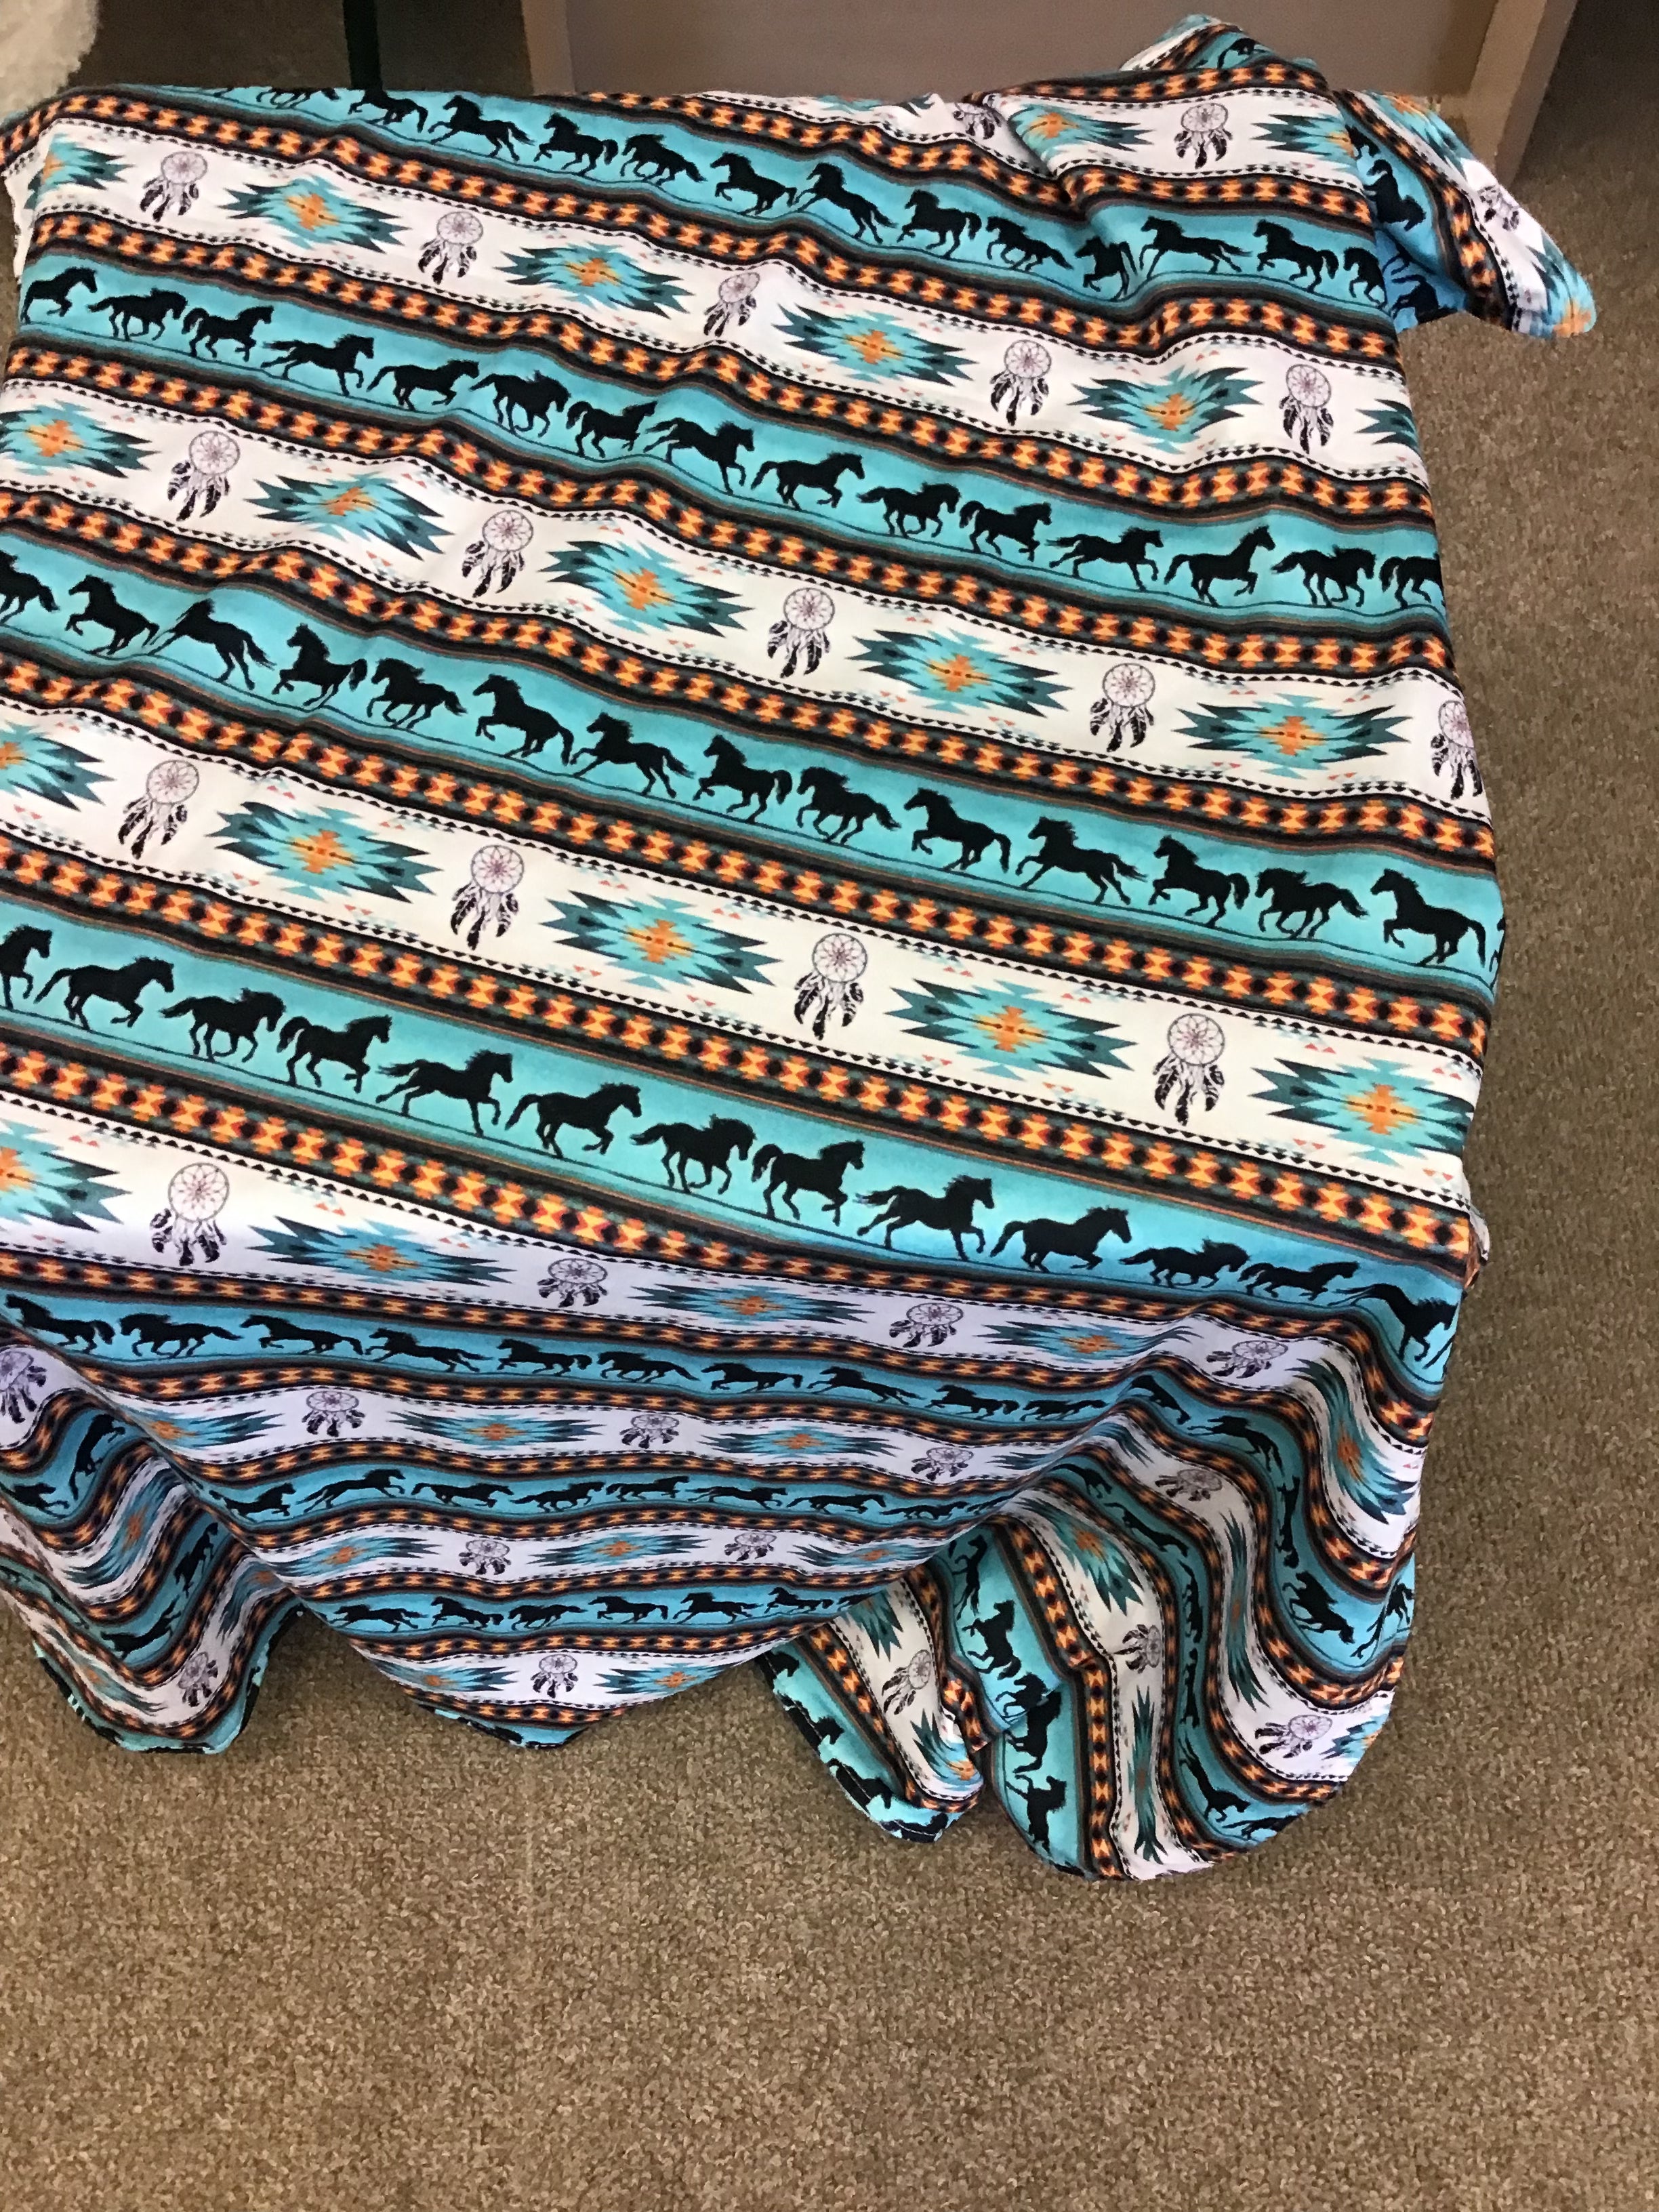 Western Themed Baby Blankets